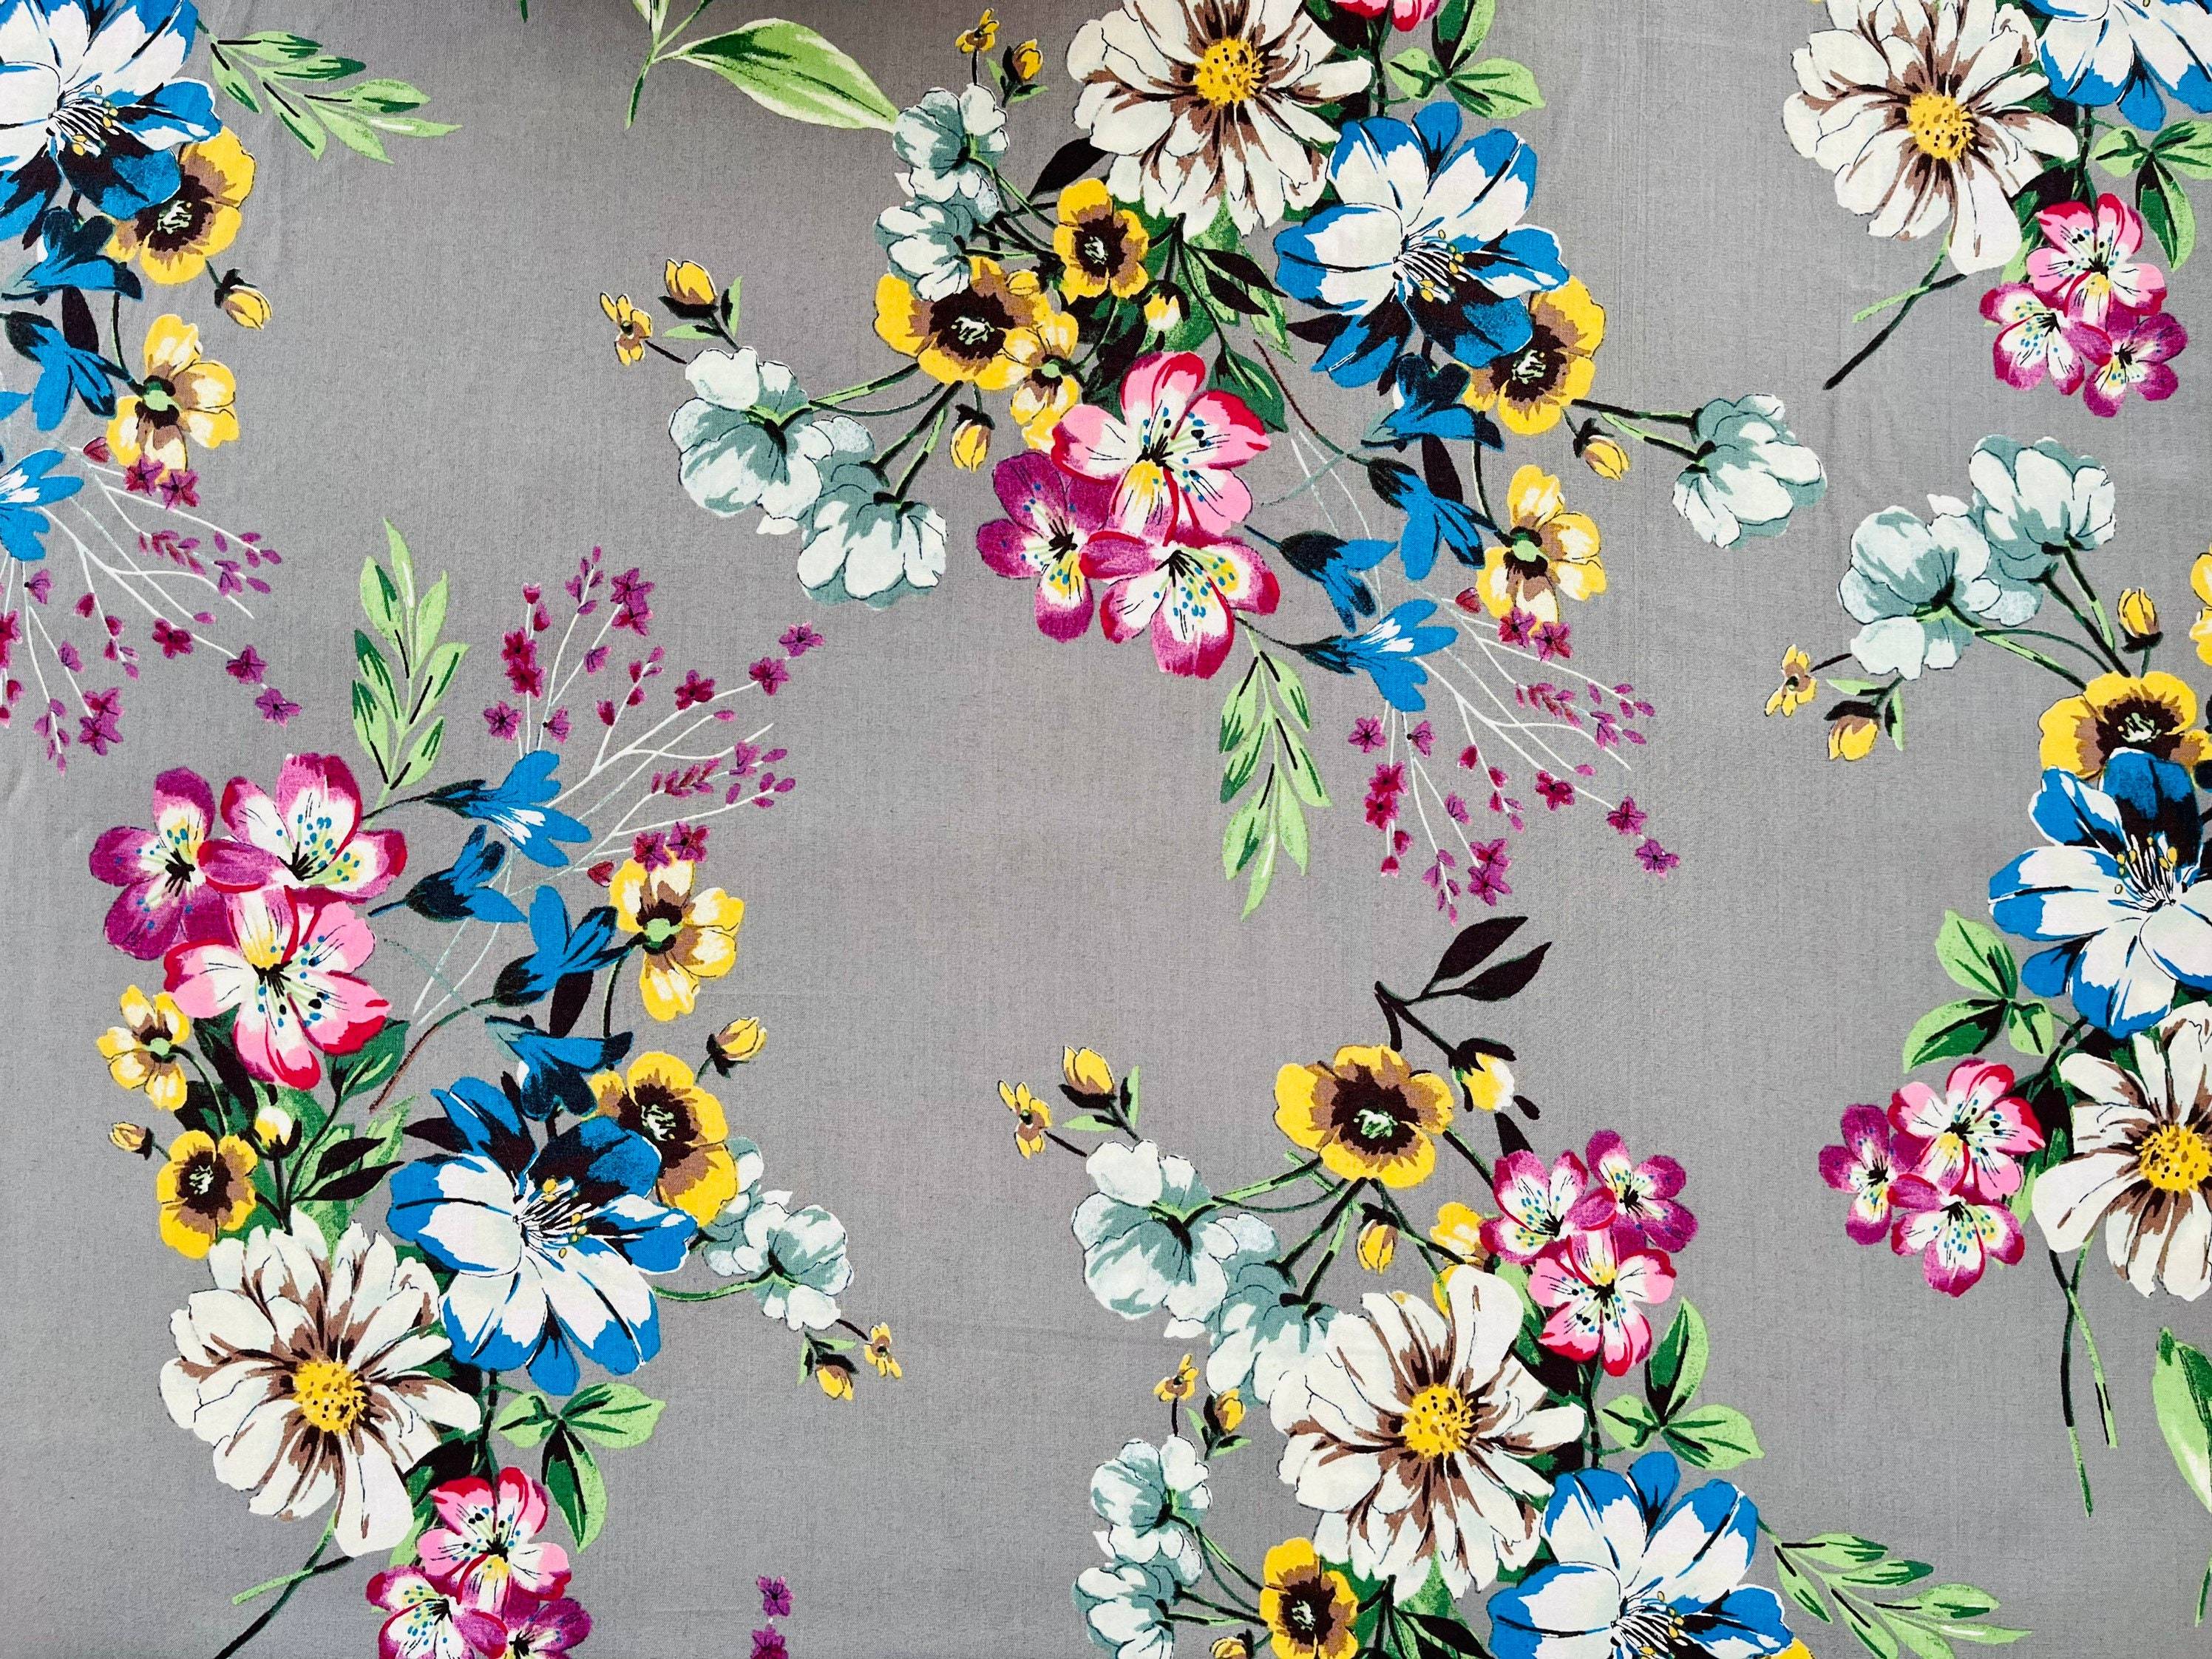 Japanese Lawn Fabric - Floral Fabric - Gray - Red - Blue - Purple - Yellow - Hokkoh  - Cotton Rayon Fabric - 307-1800 - 4A